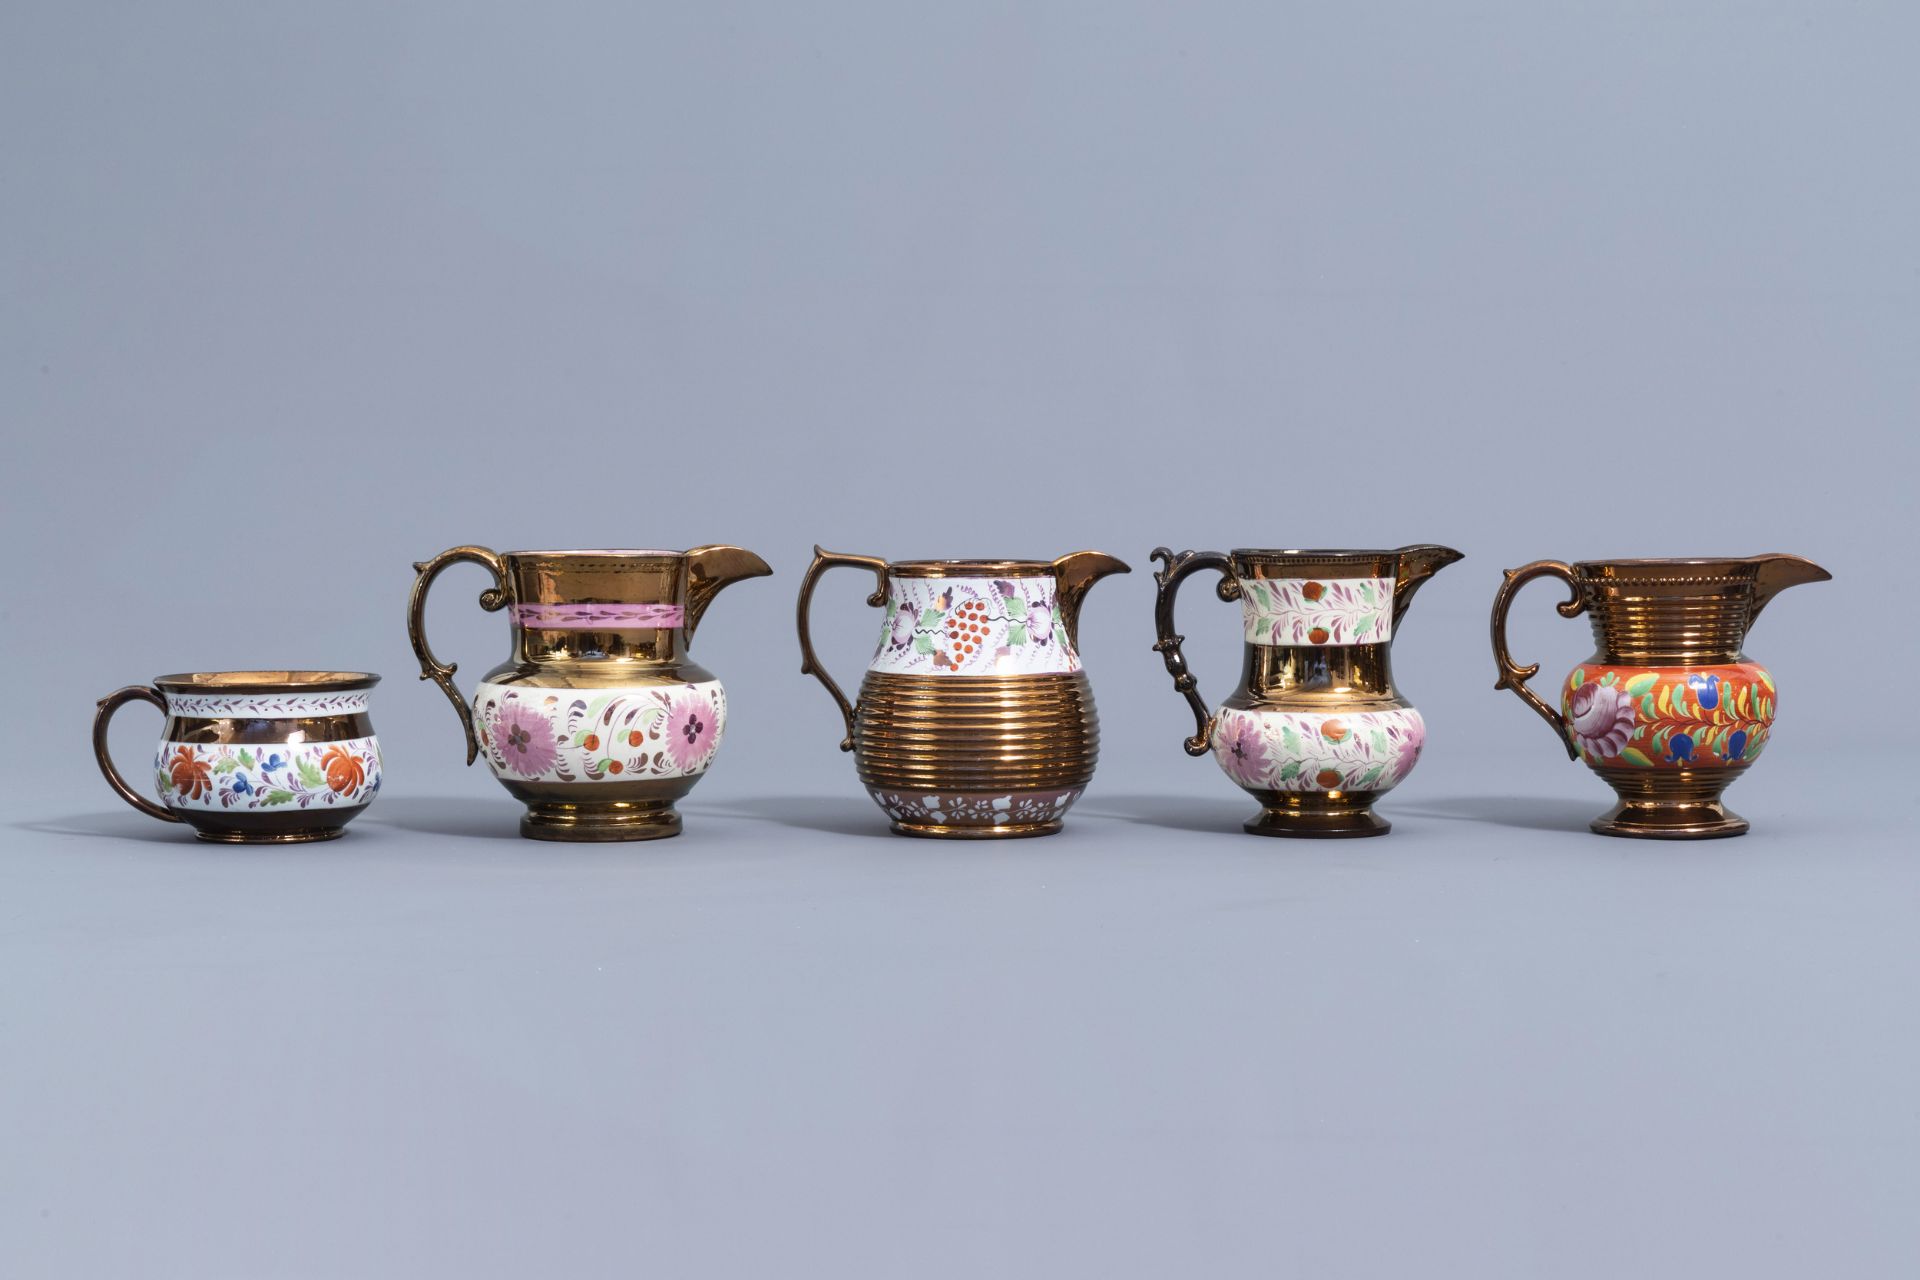 A varied collection of English lustreware items with polychrome floral design, 19th C. - Image 8 of 64